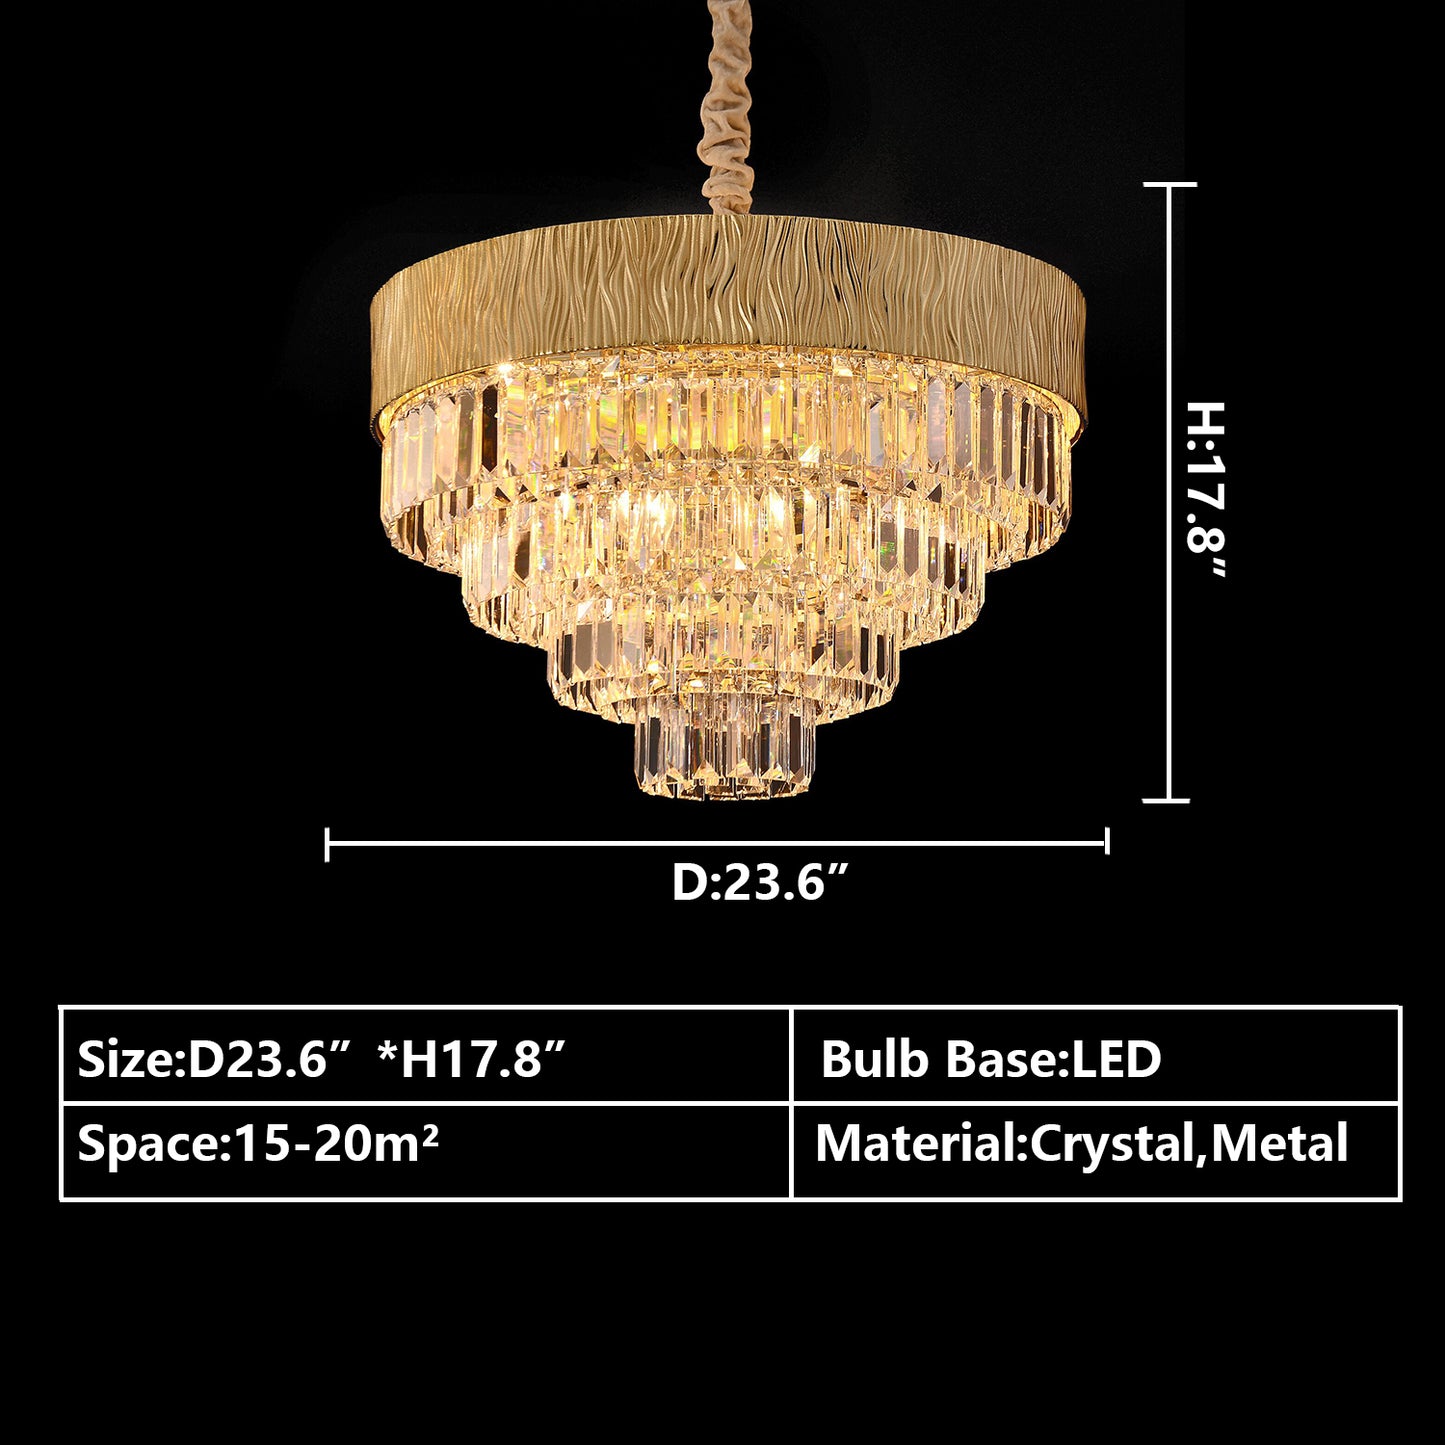 Round:D23.6"*H17.8" chandelier,chandeliers,light,lamp,pendant,round,oval,tiers,layers,multi-tier,multi-layer,gold,luxury,light luxury,ceiling,chain,crystal,metal,living room,dining room,bedroom,dining table,bar,hallway